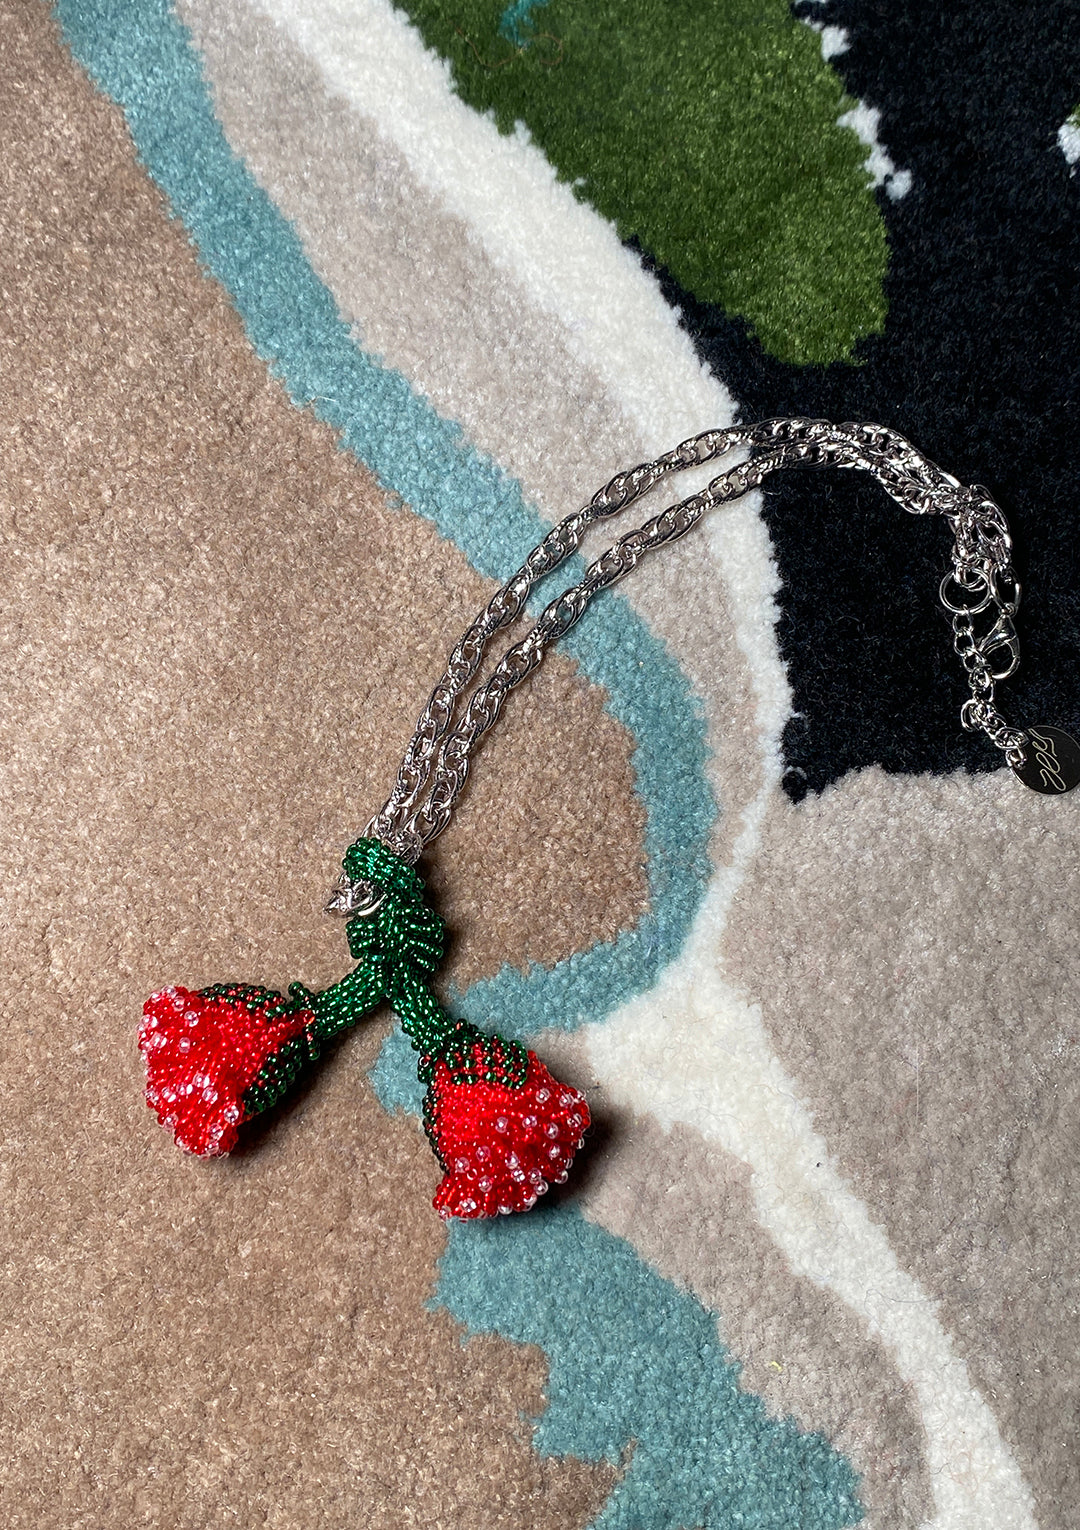 Double Rose Necklace